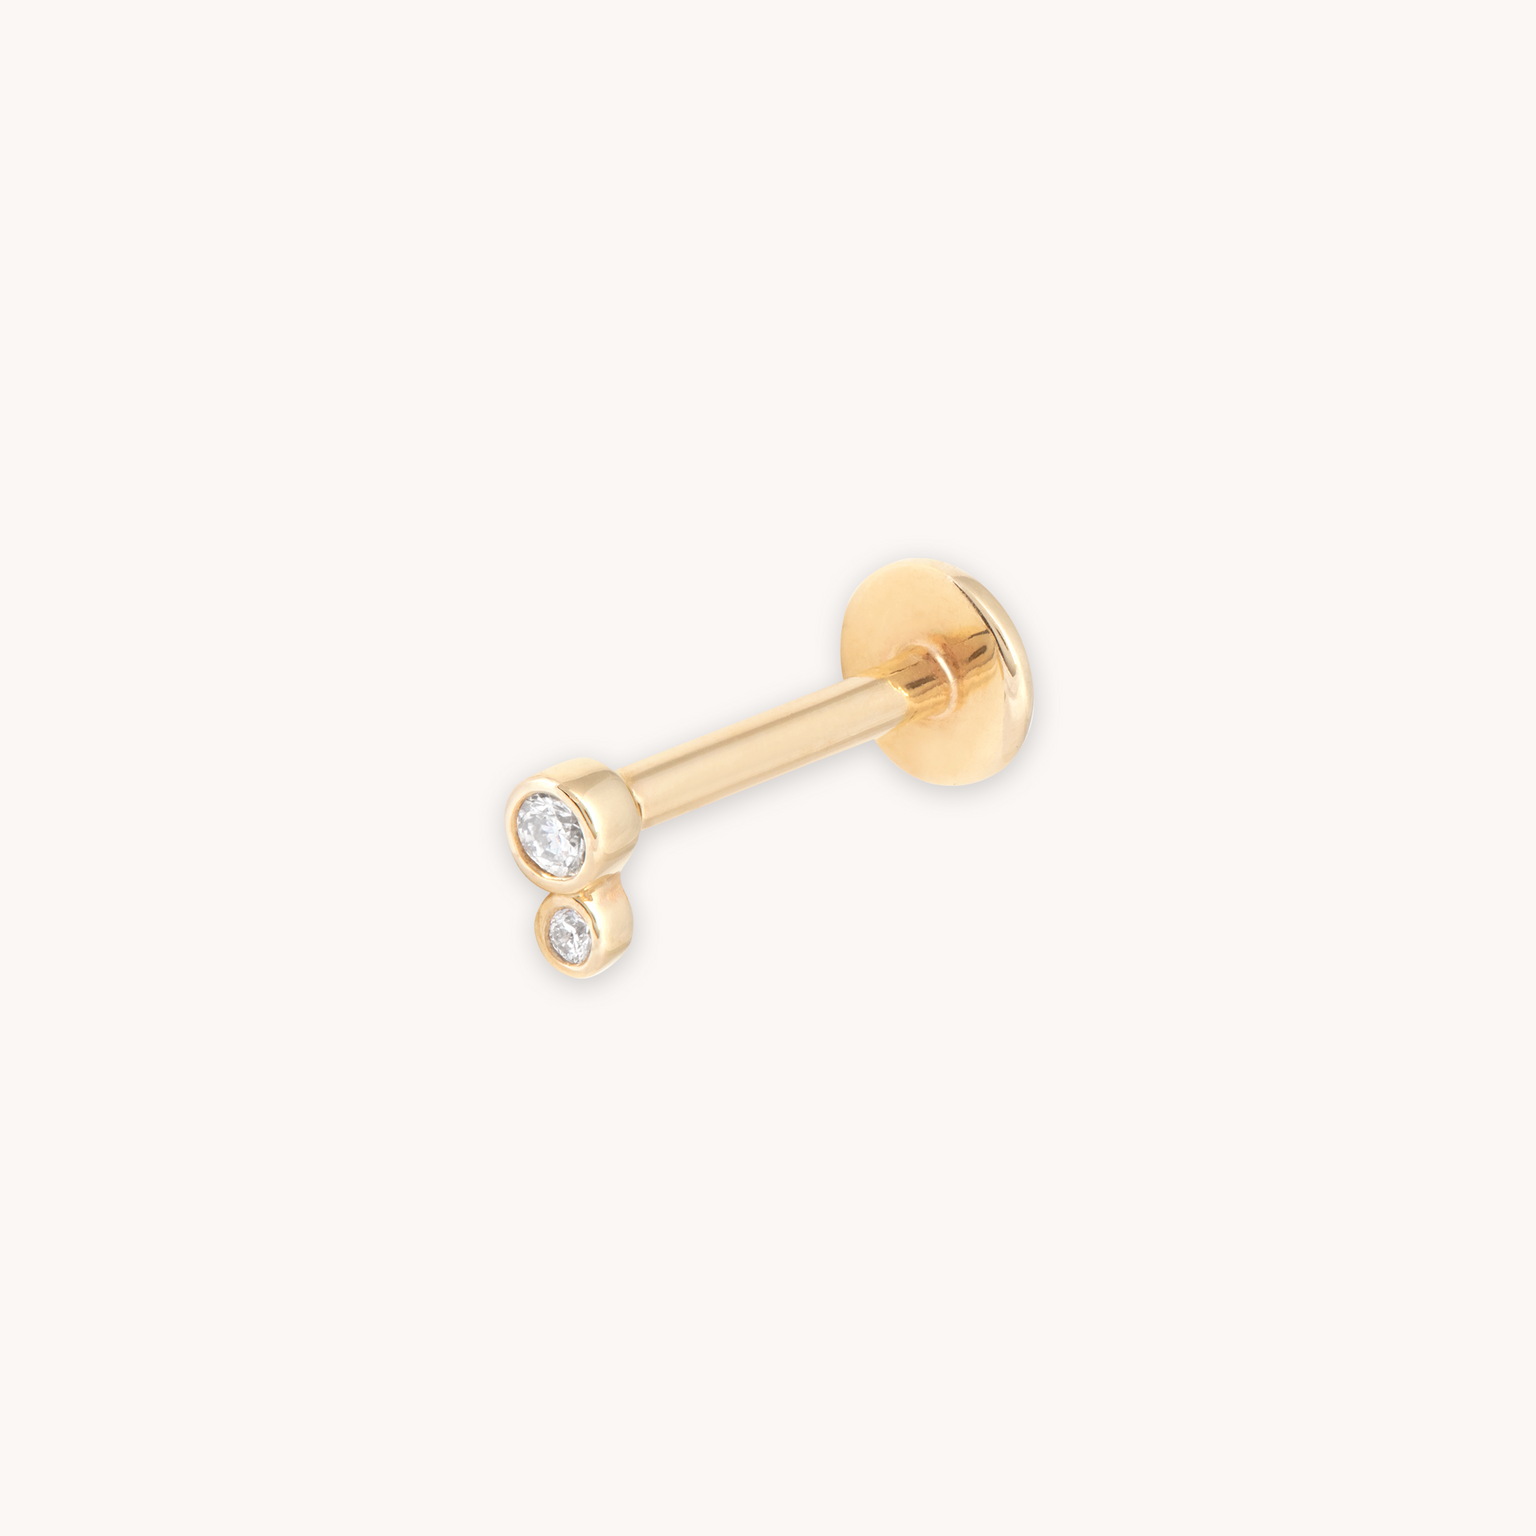 SOLID GOLD DOUBLE DIAMOND PIERCING STUD CUT OUT